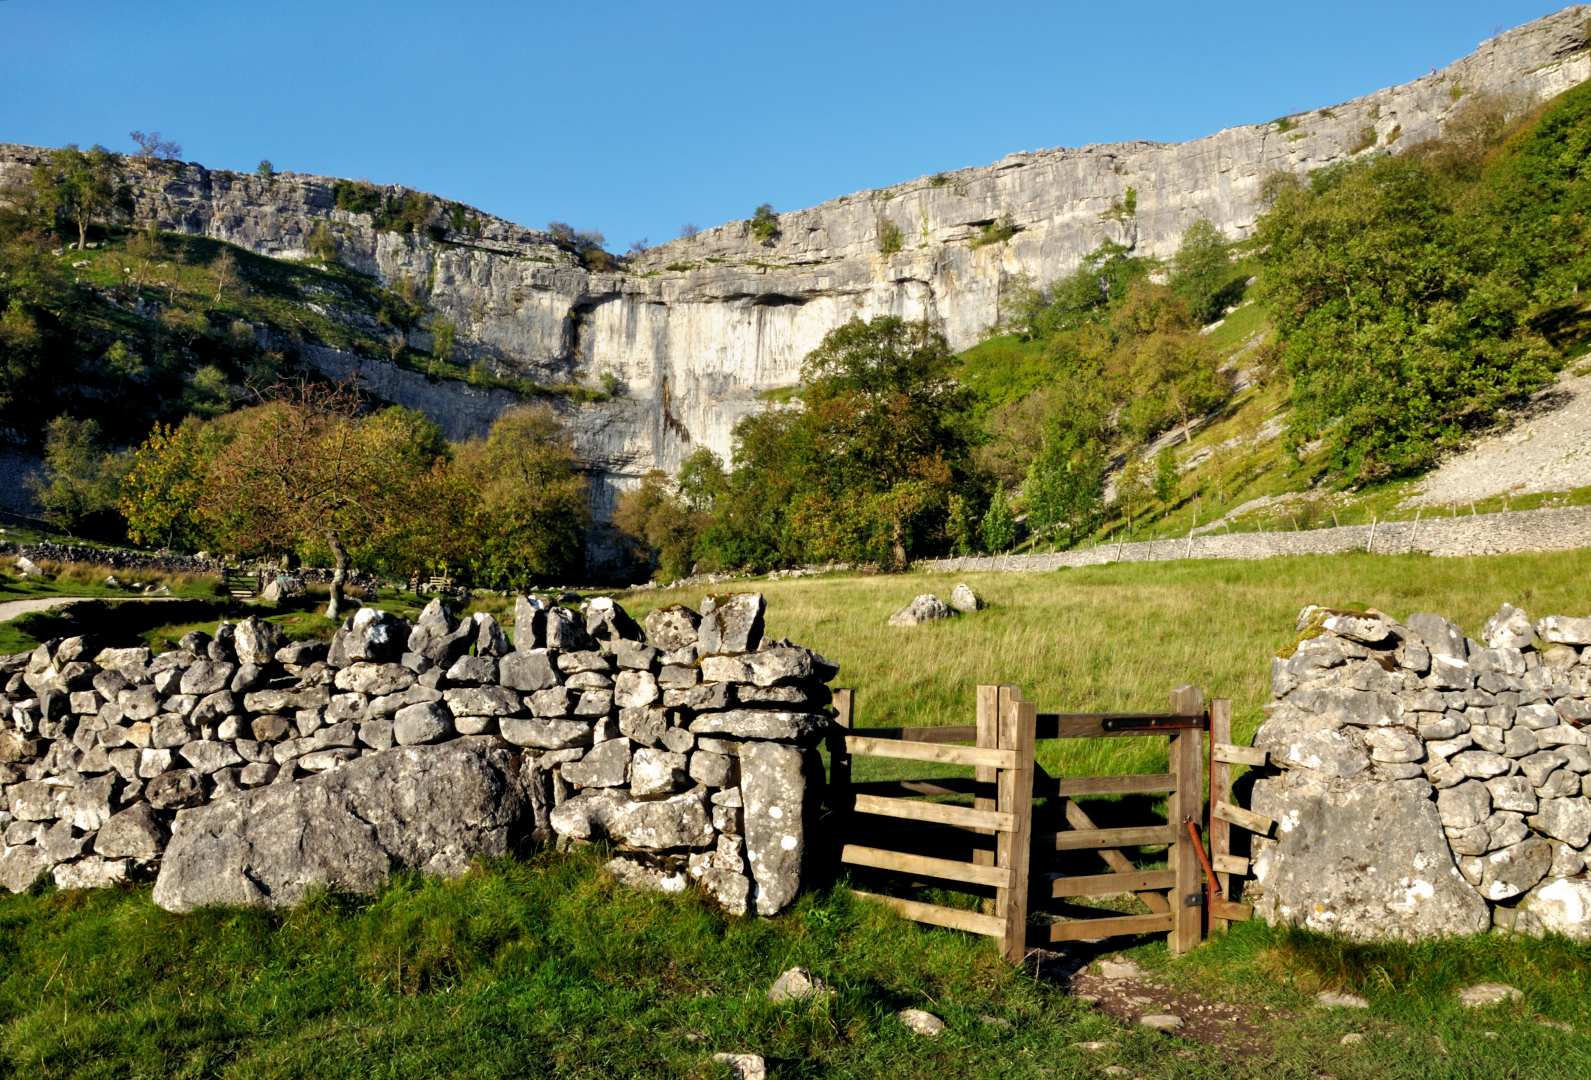 A rise of limestone at Malham Cove, one of the best places to explore in Yorkshire